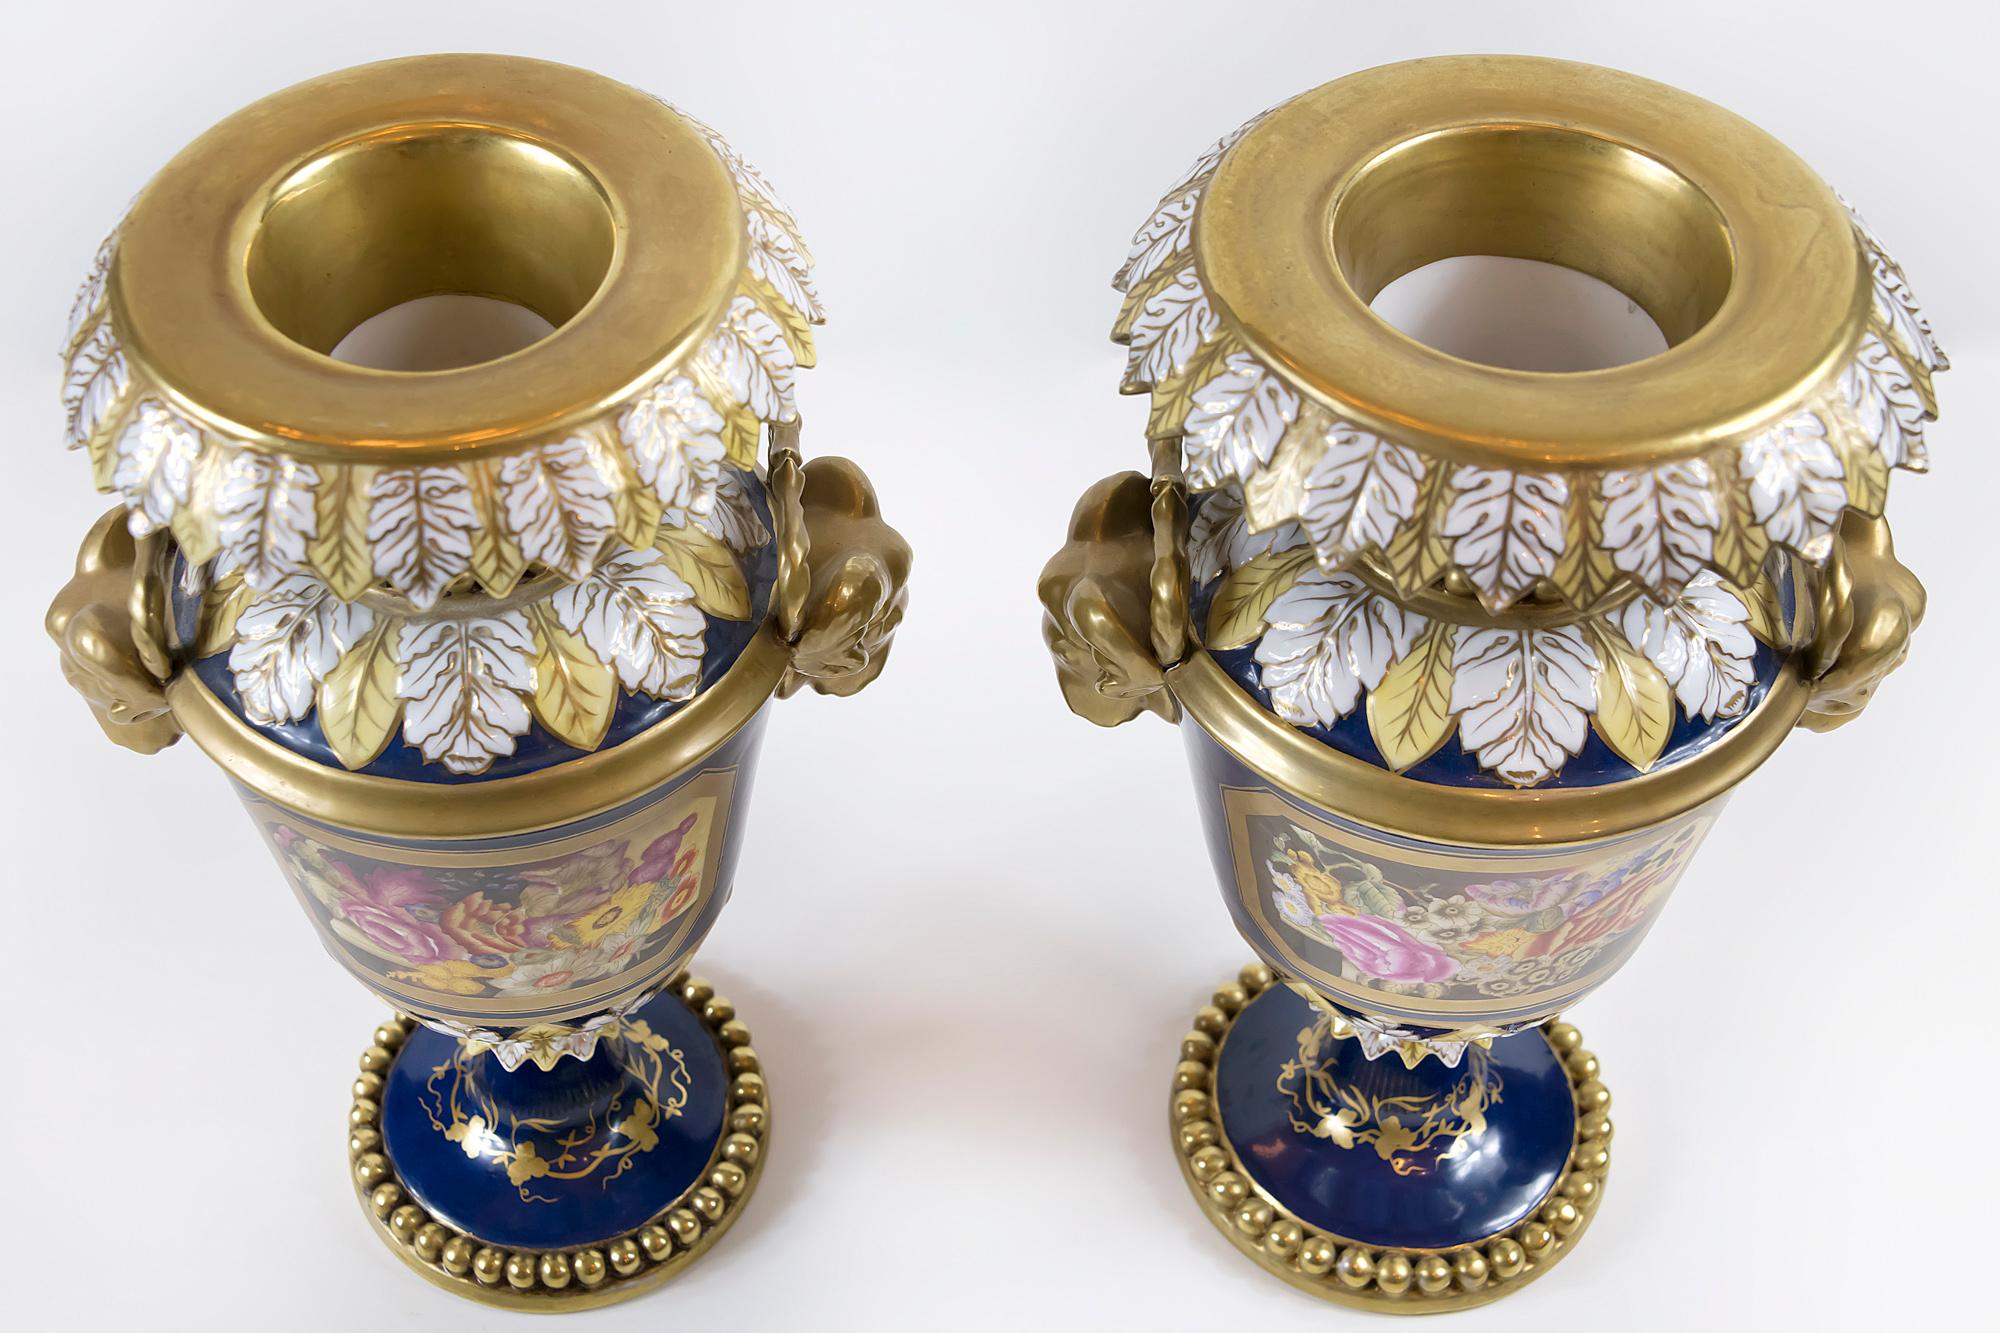 Pair of Sèvres Style French Porcelain Cobalt Blue Vases with Handmade Decor 1